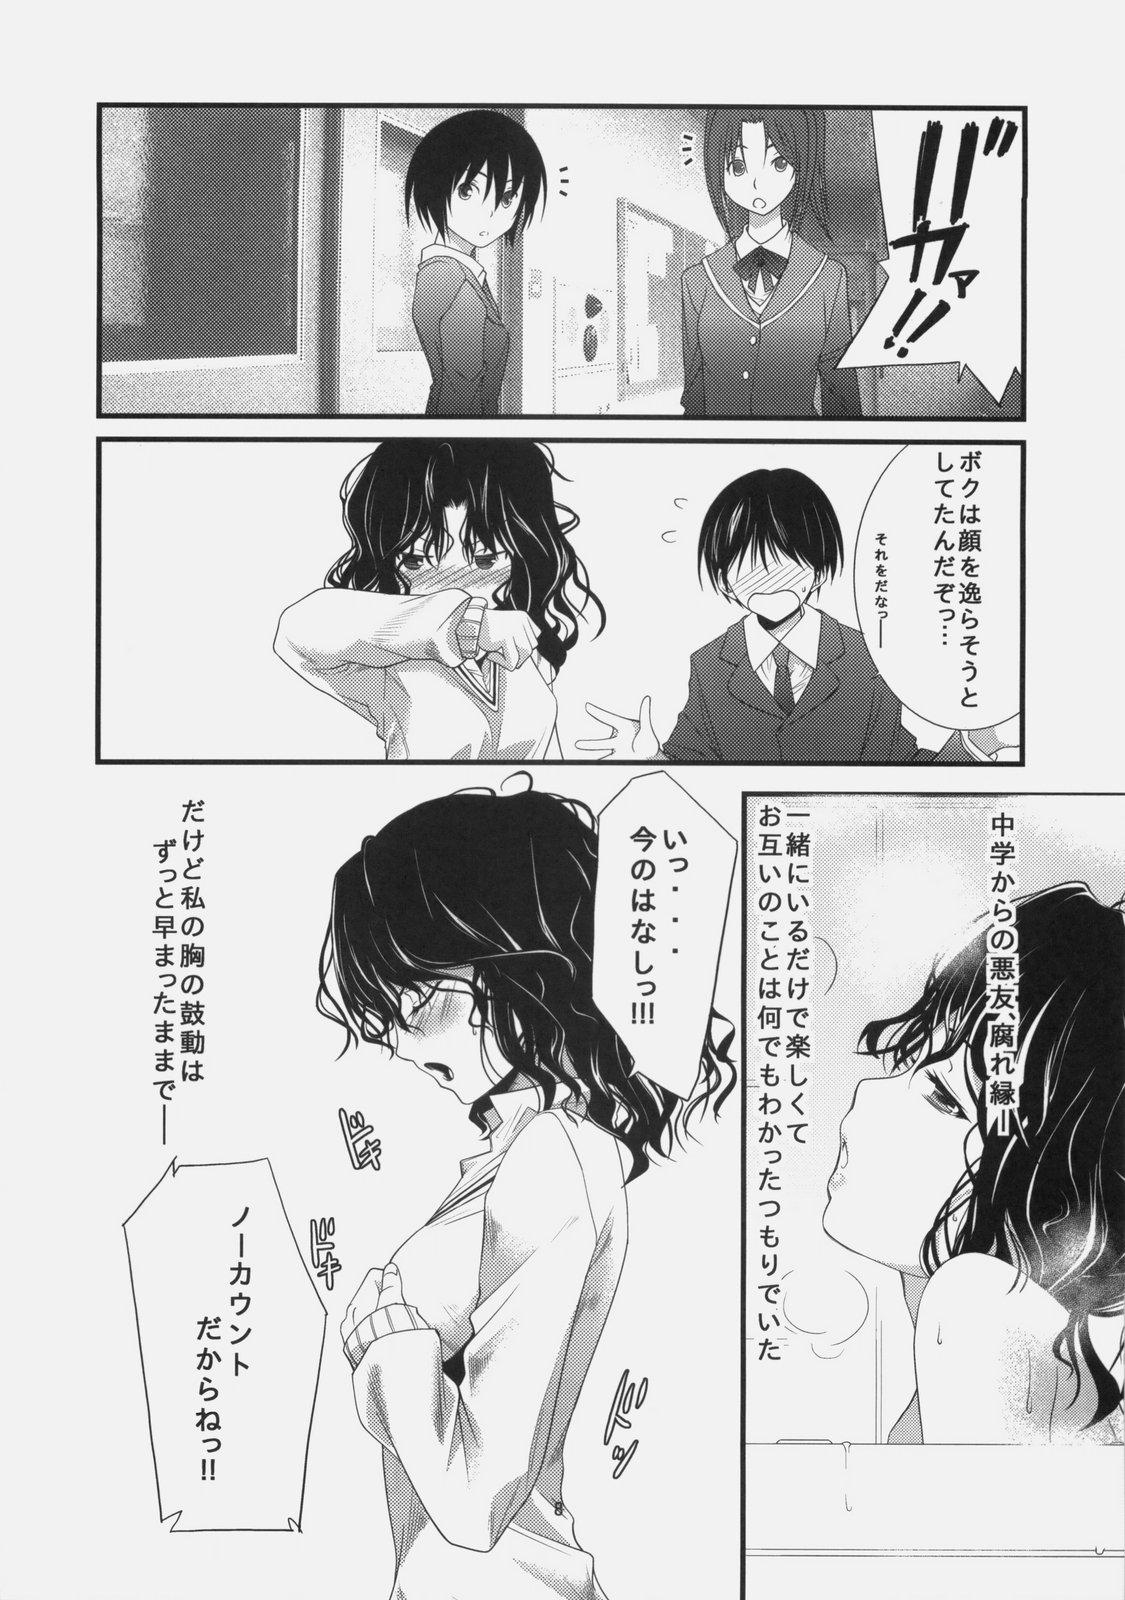 Bald Pussy Yesterday & Today - Amagami Gayfuck - Page 7